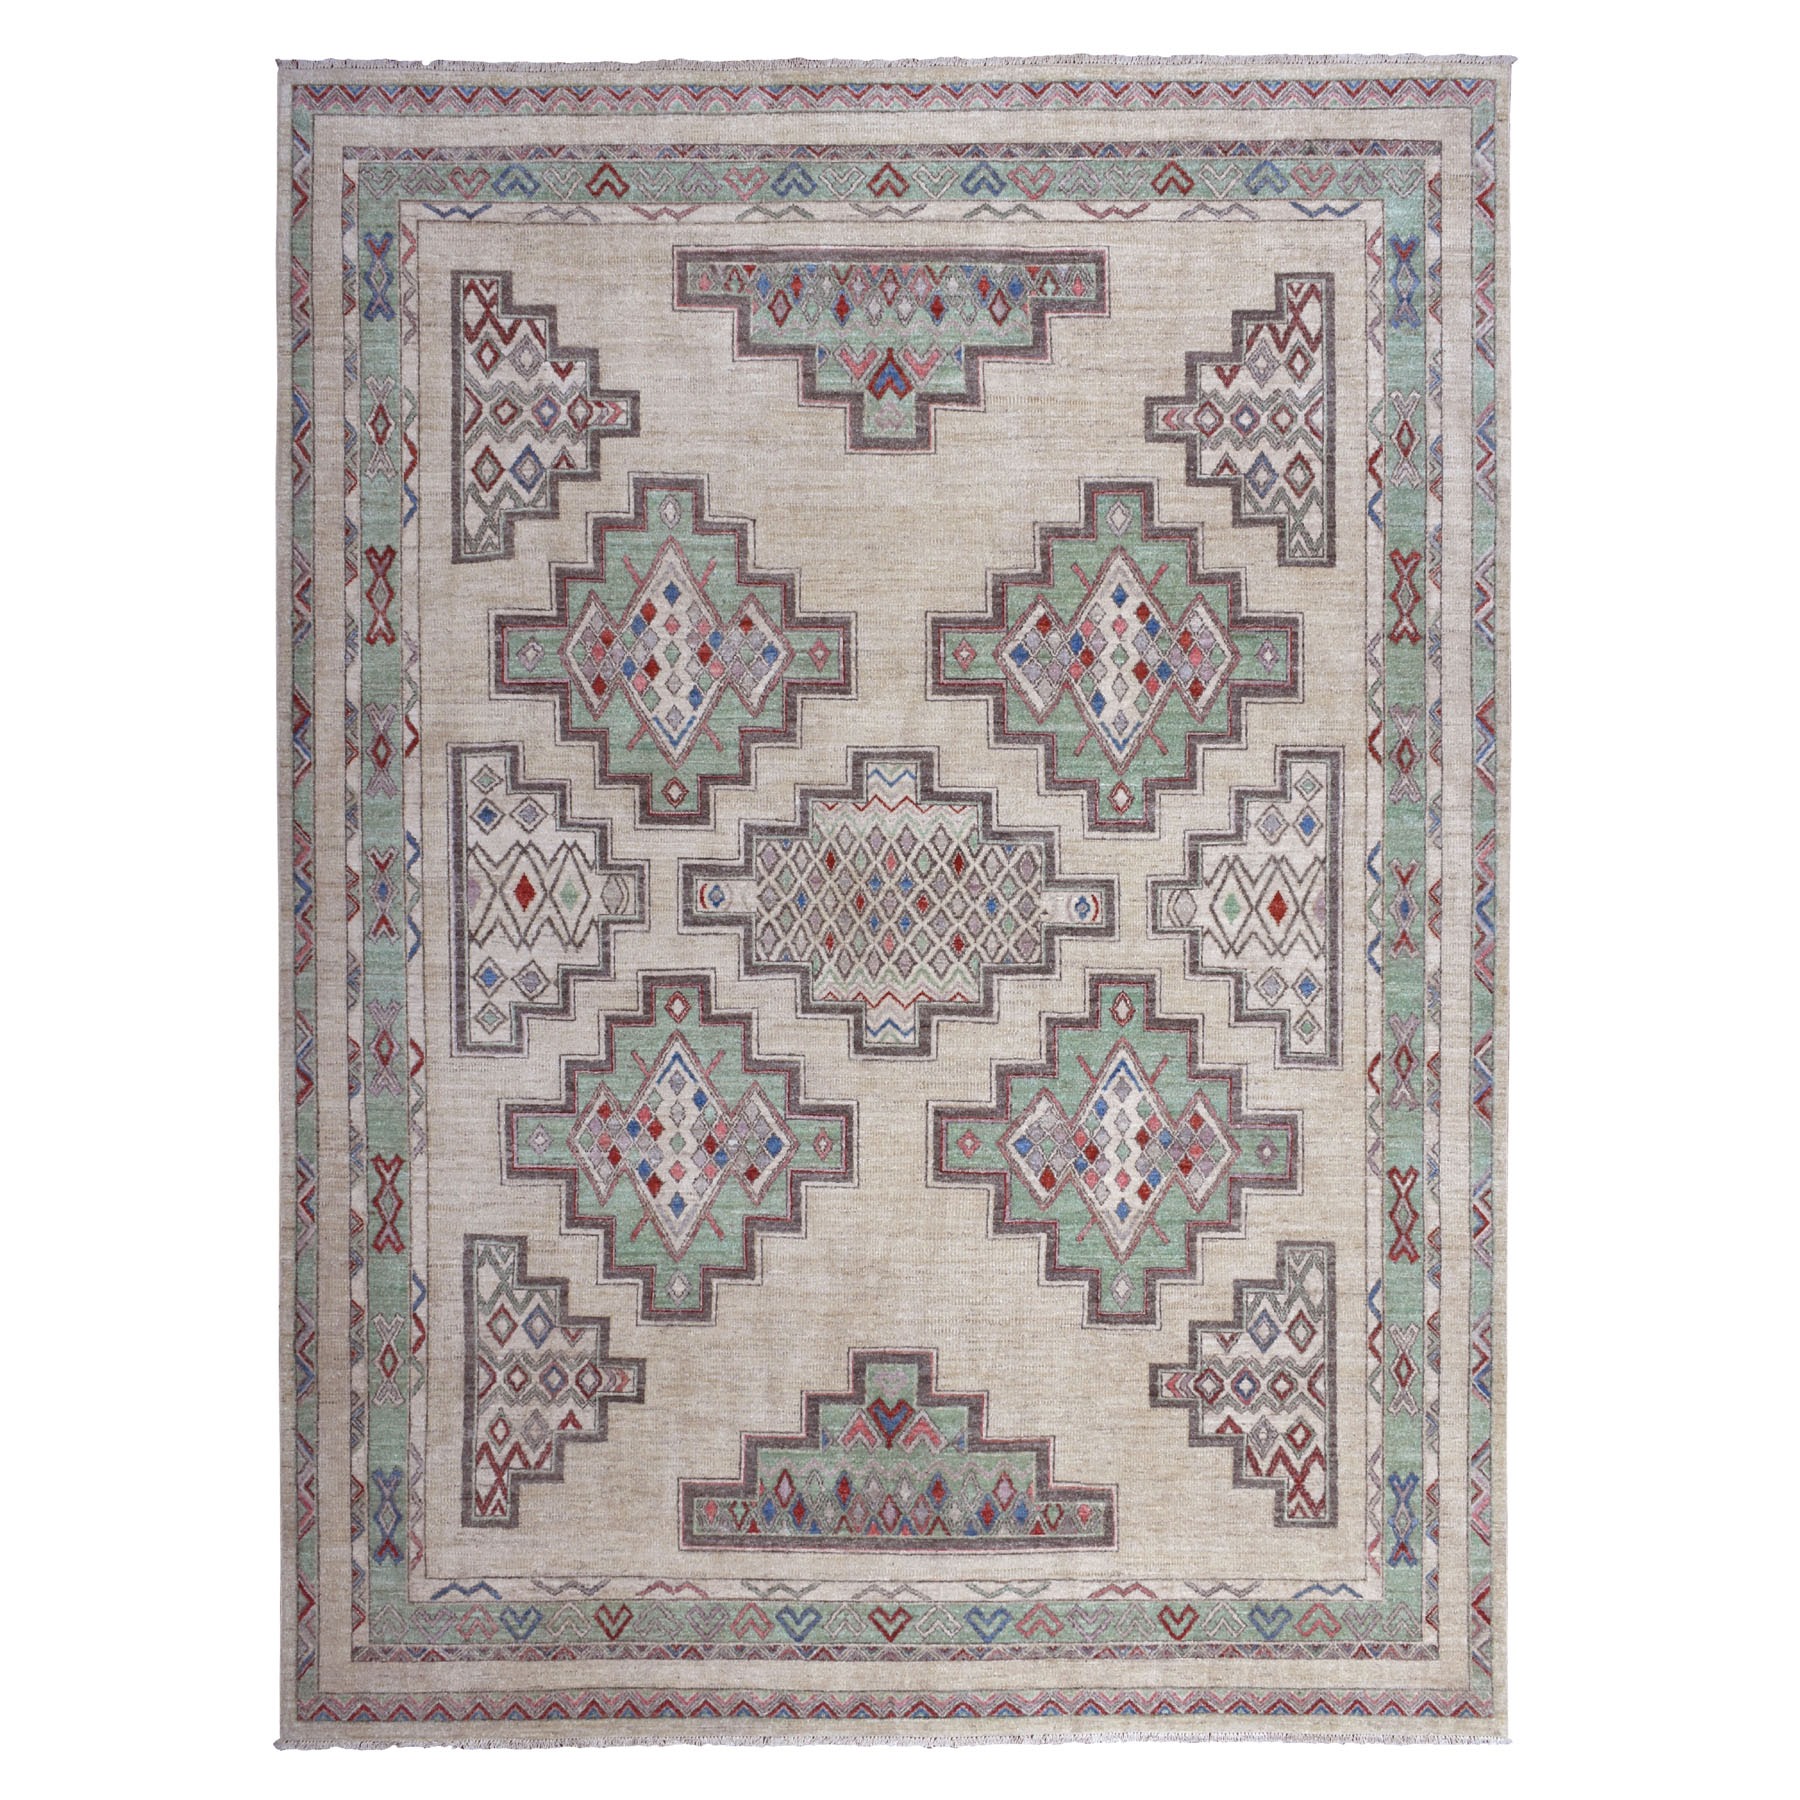 9'x11'10" Peshawar With Berber Motifs,Pop Of Color Pure Wool Hand Woven Oriental Rug 